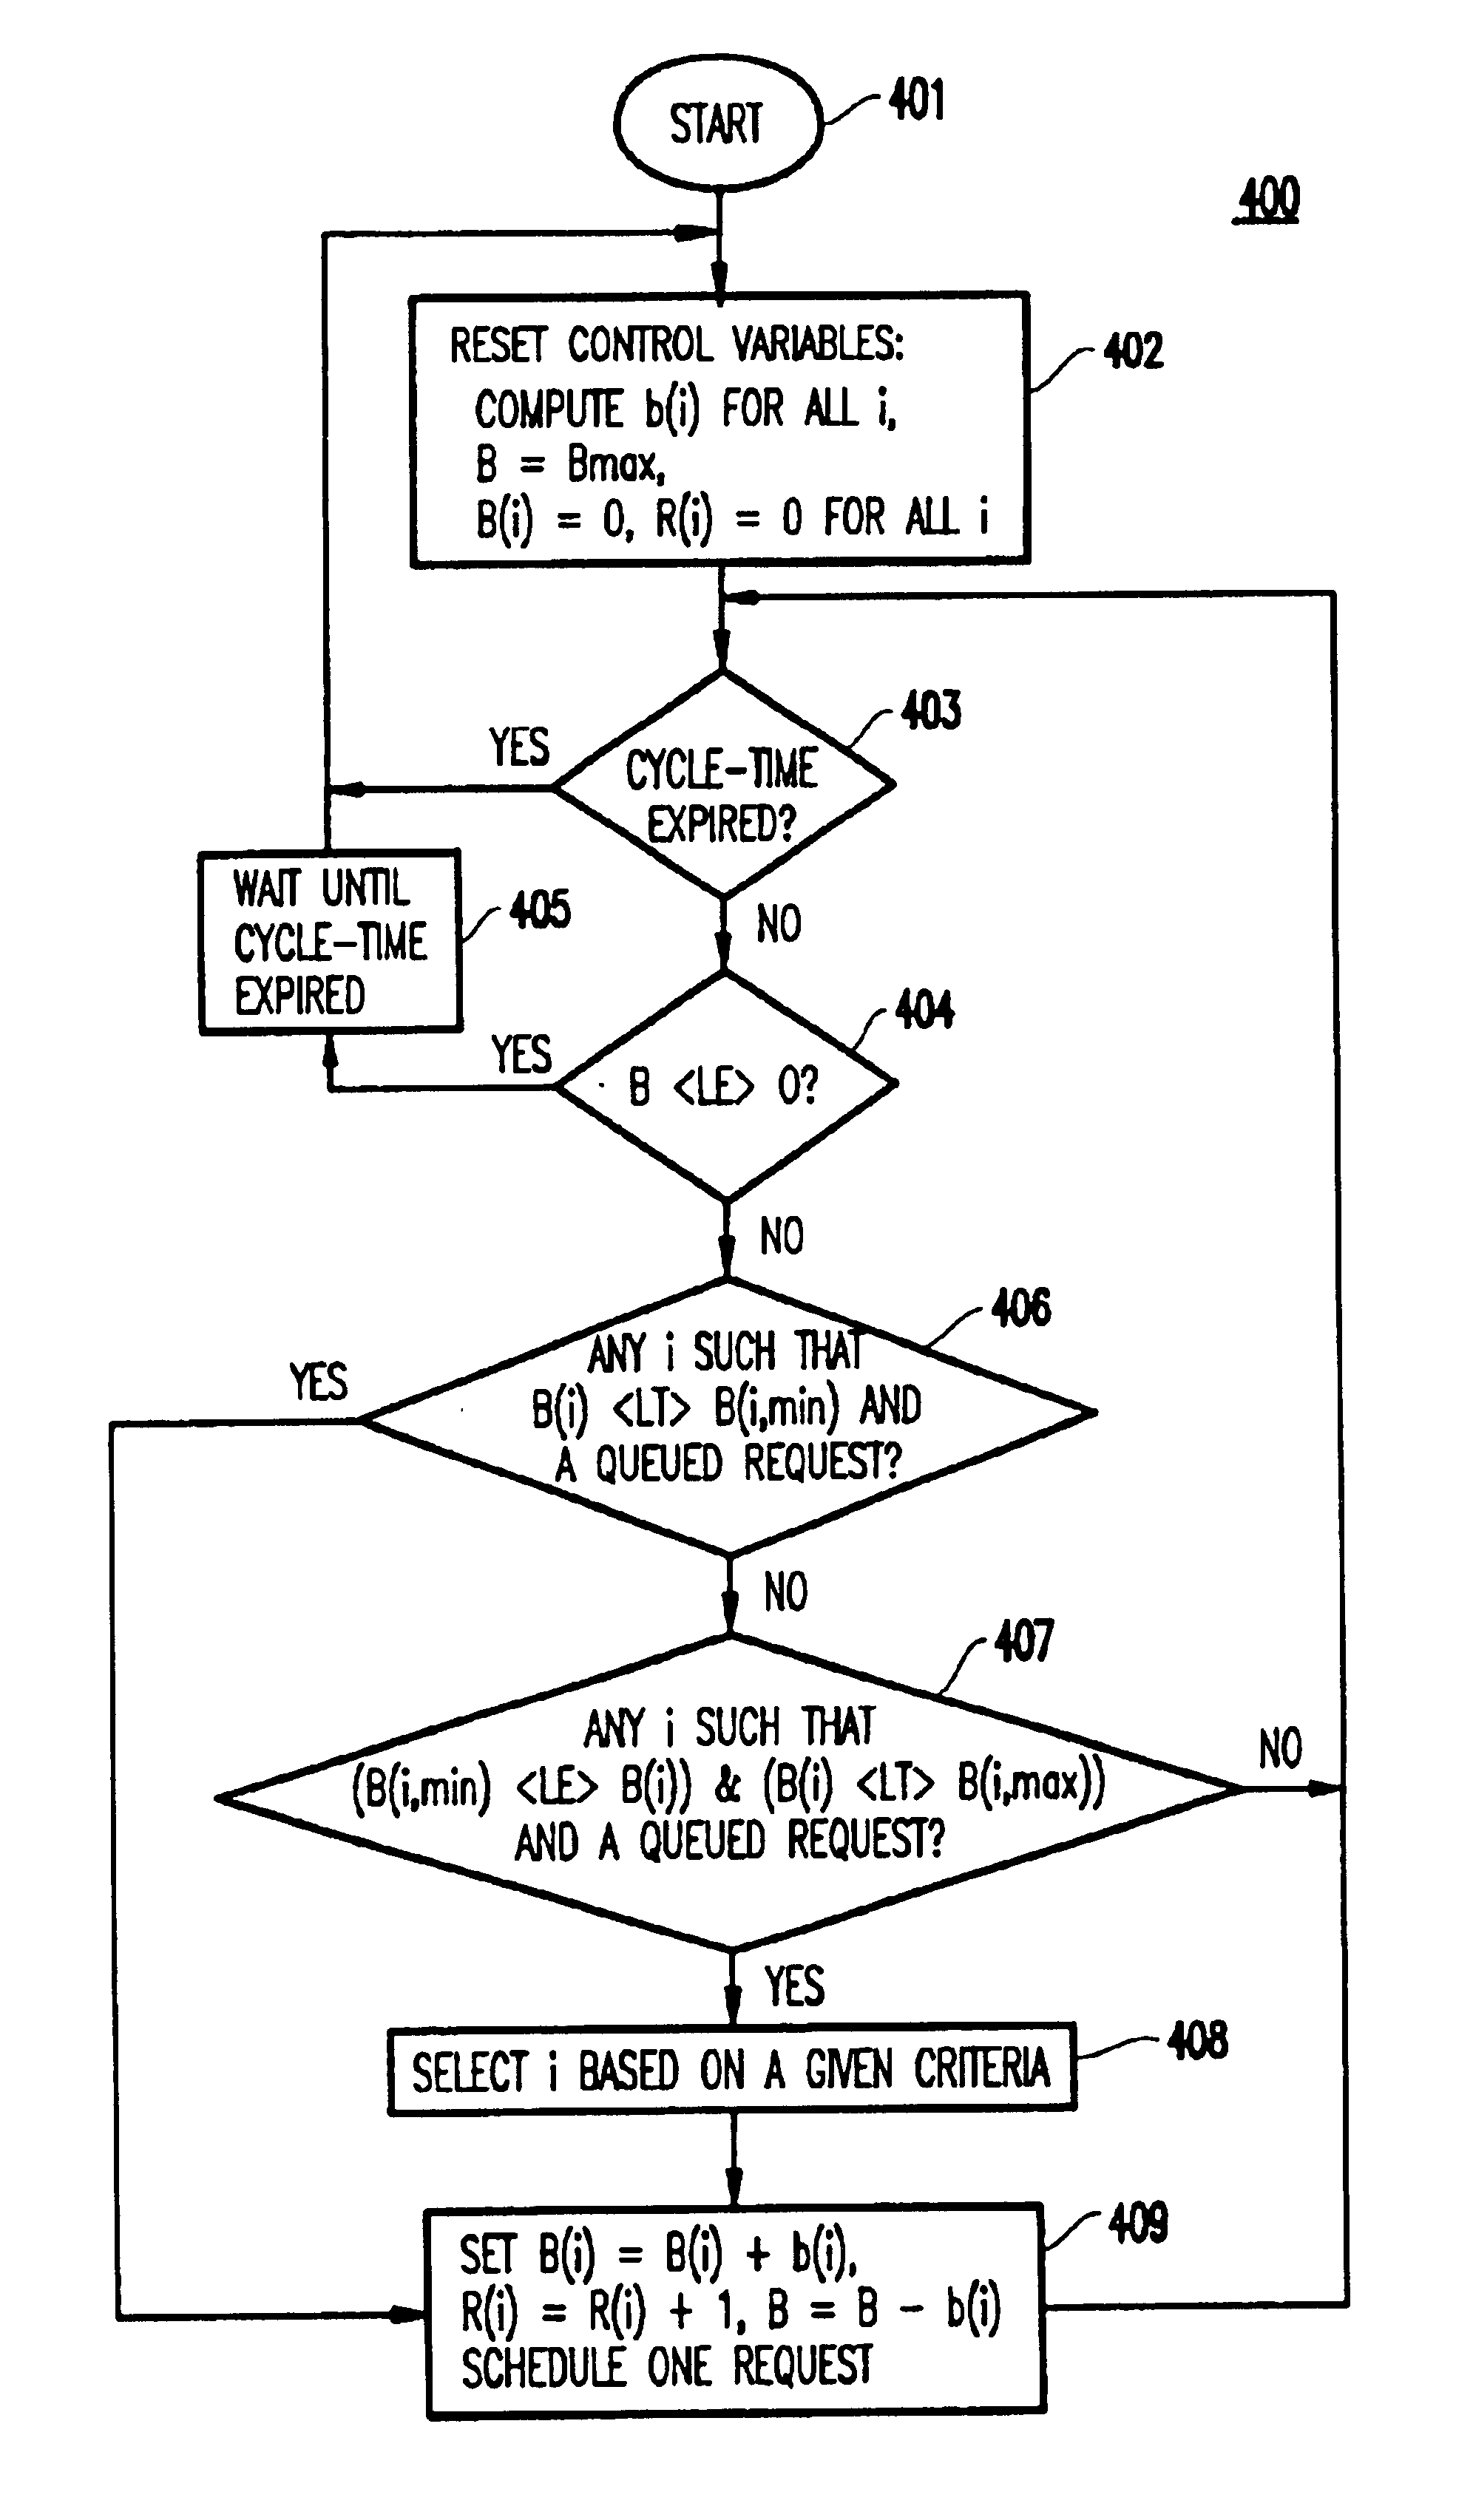 System and method for enforcing communications bandwidth based service level agreements to plurality of customers hosted on a clustered web server